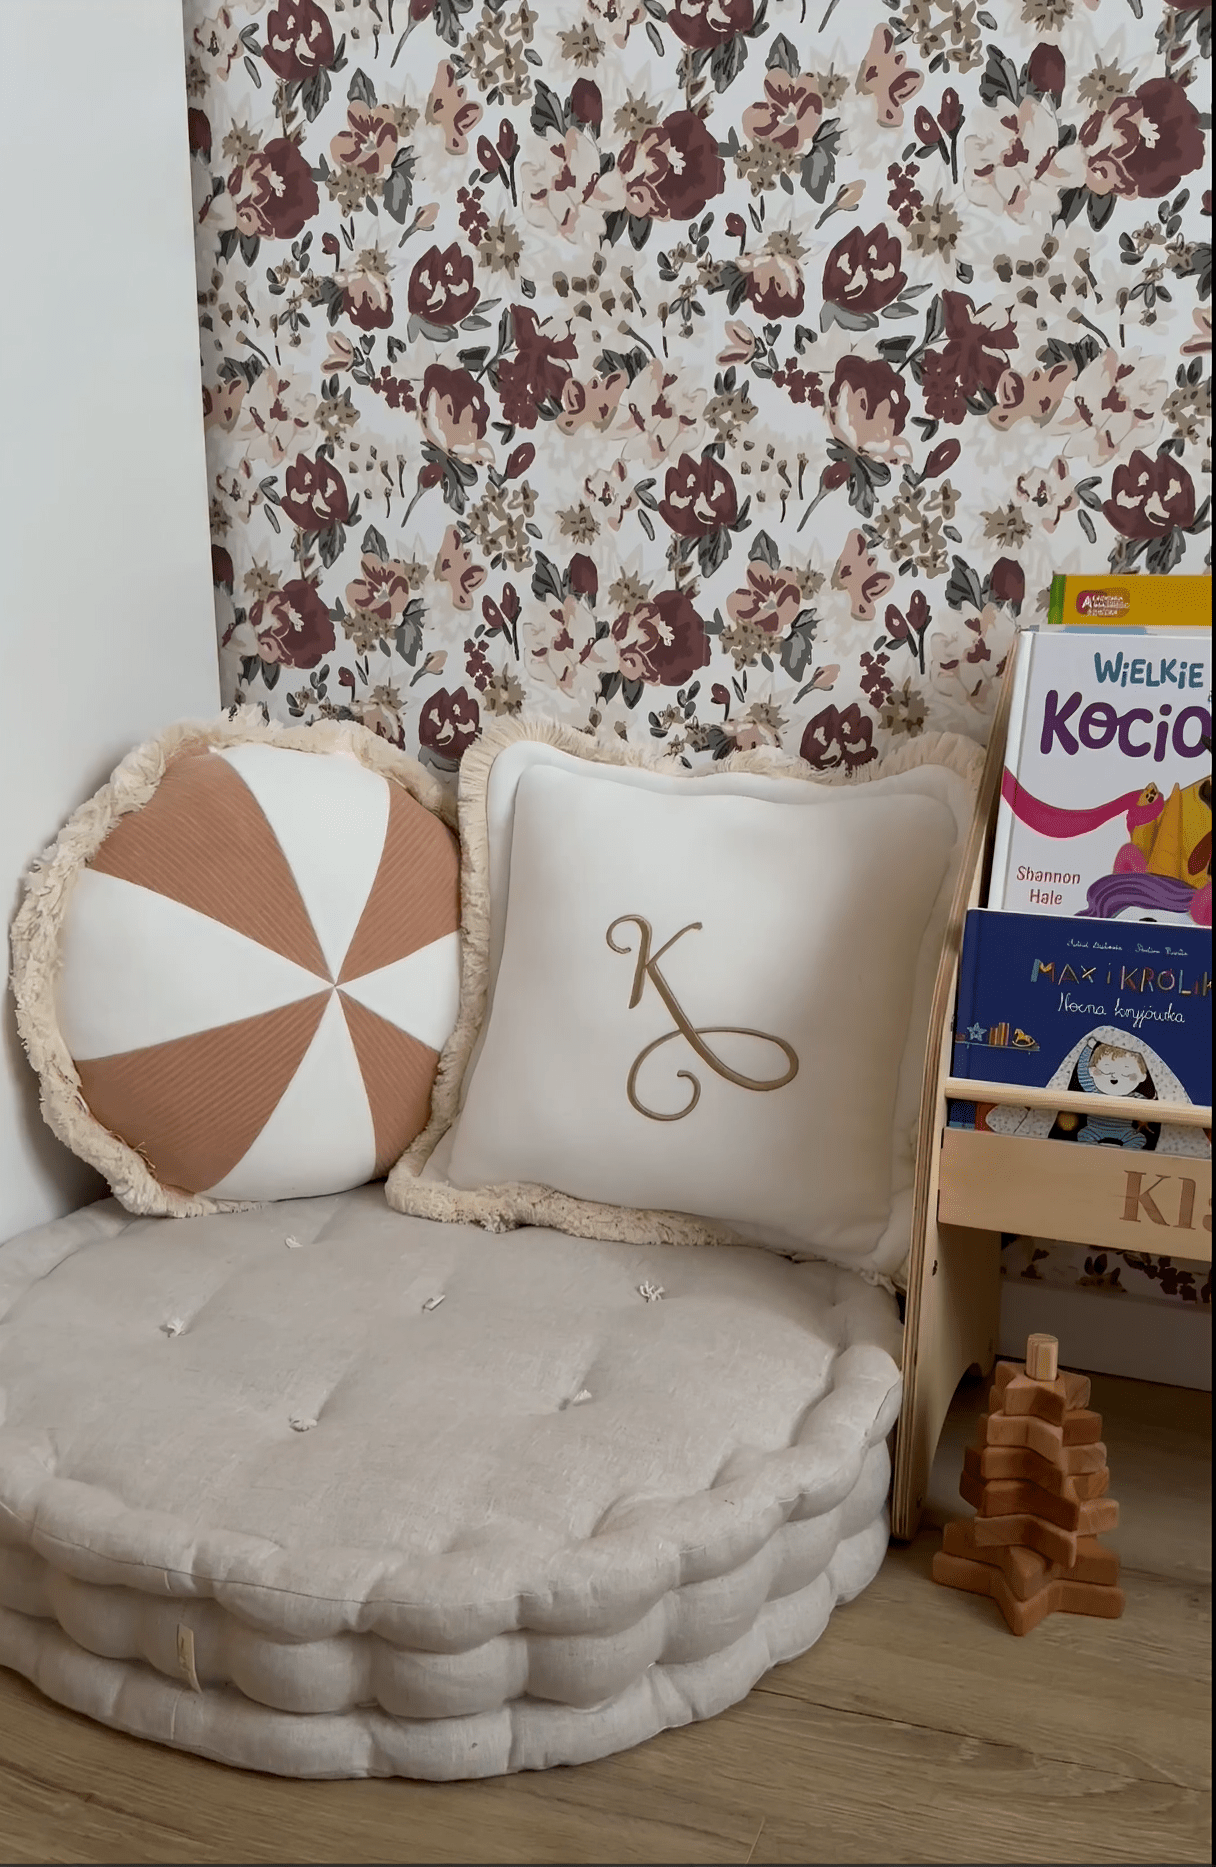 A cozy reading nook with a large cushioned floor seat, decorative pillows, and a floral wallpaper featuring maroon and taupe flowers